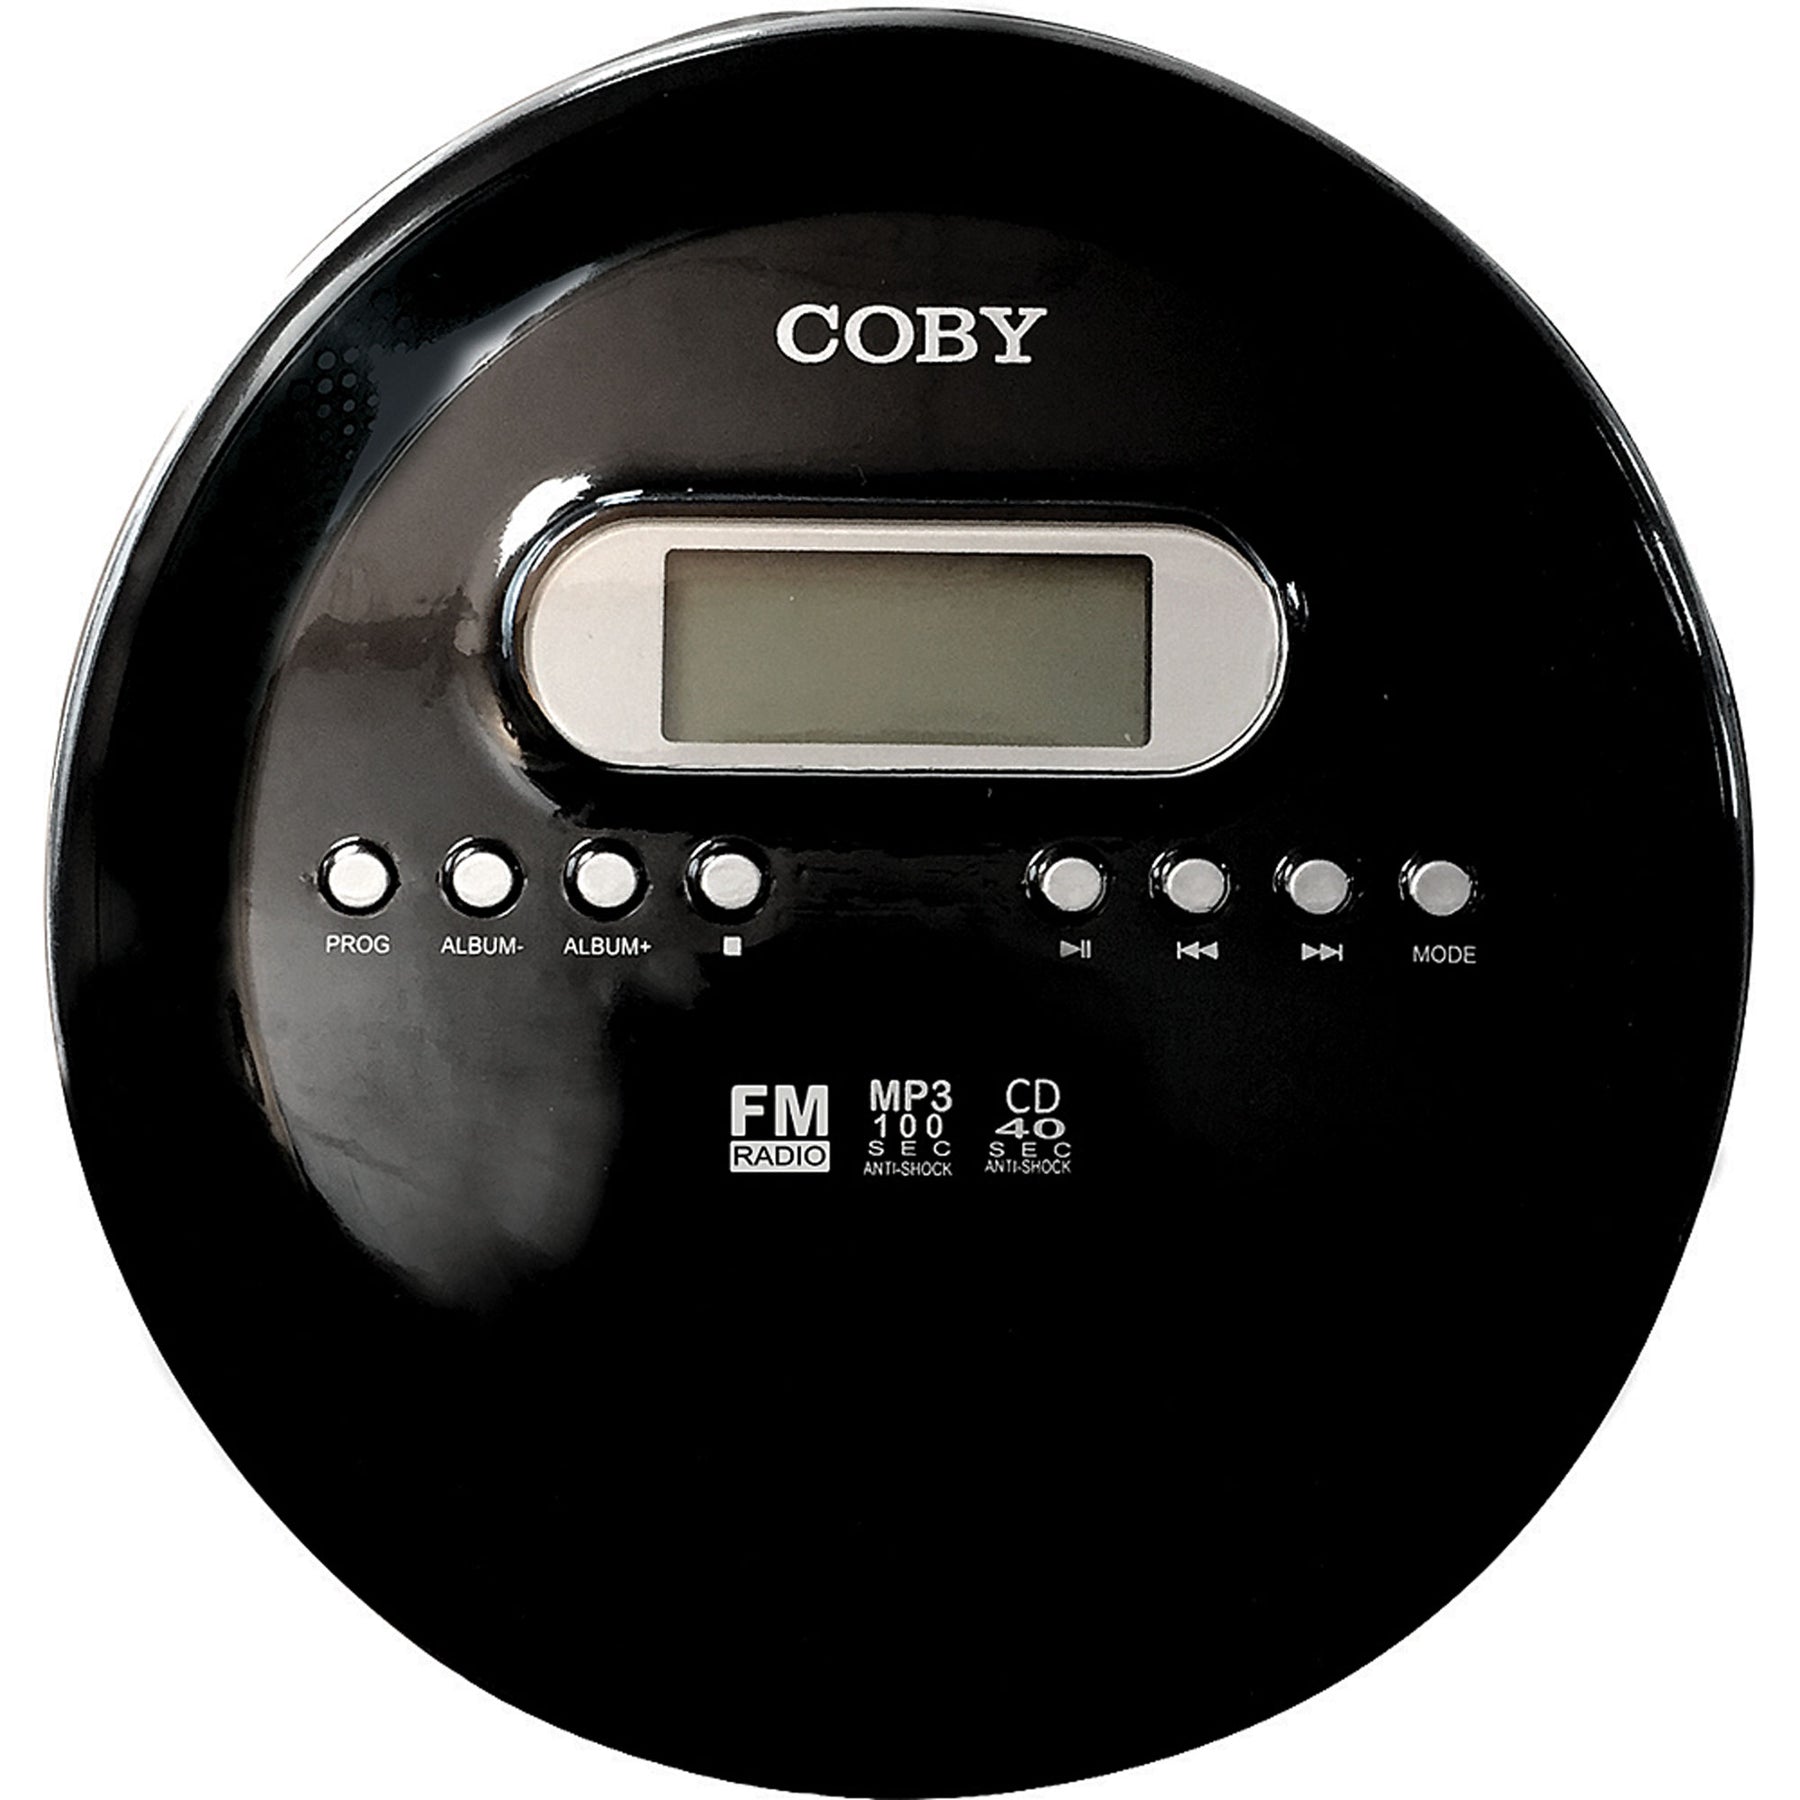 Coby CD-197 Portable Personal Compact CD Player with FM Radio, Black